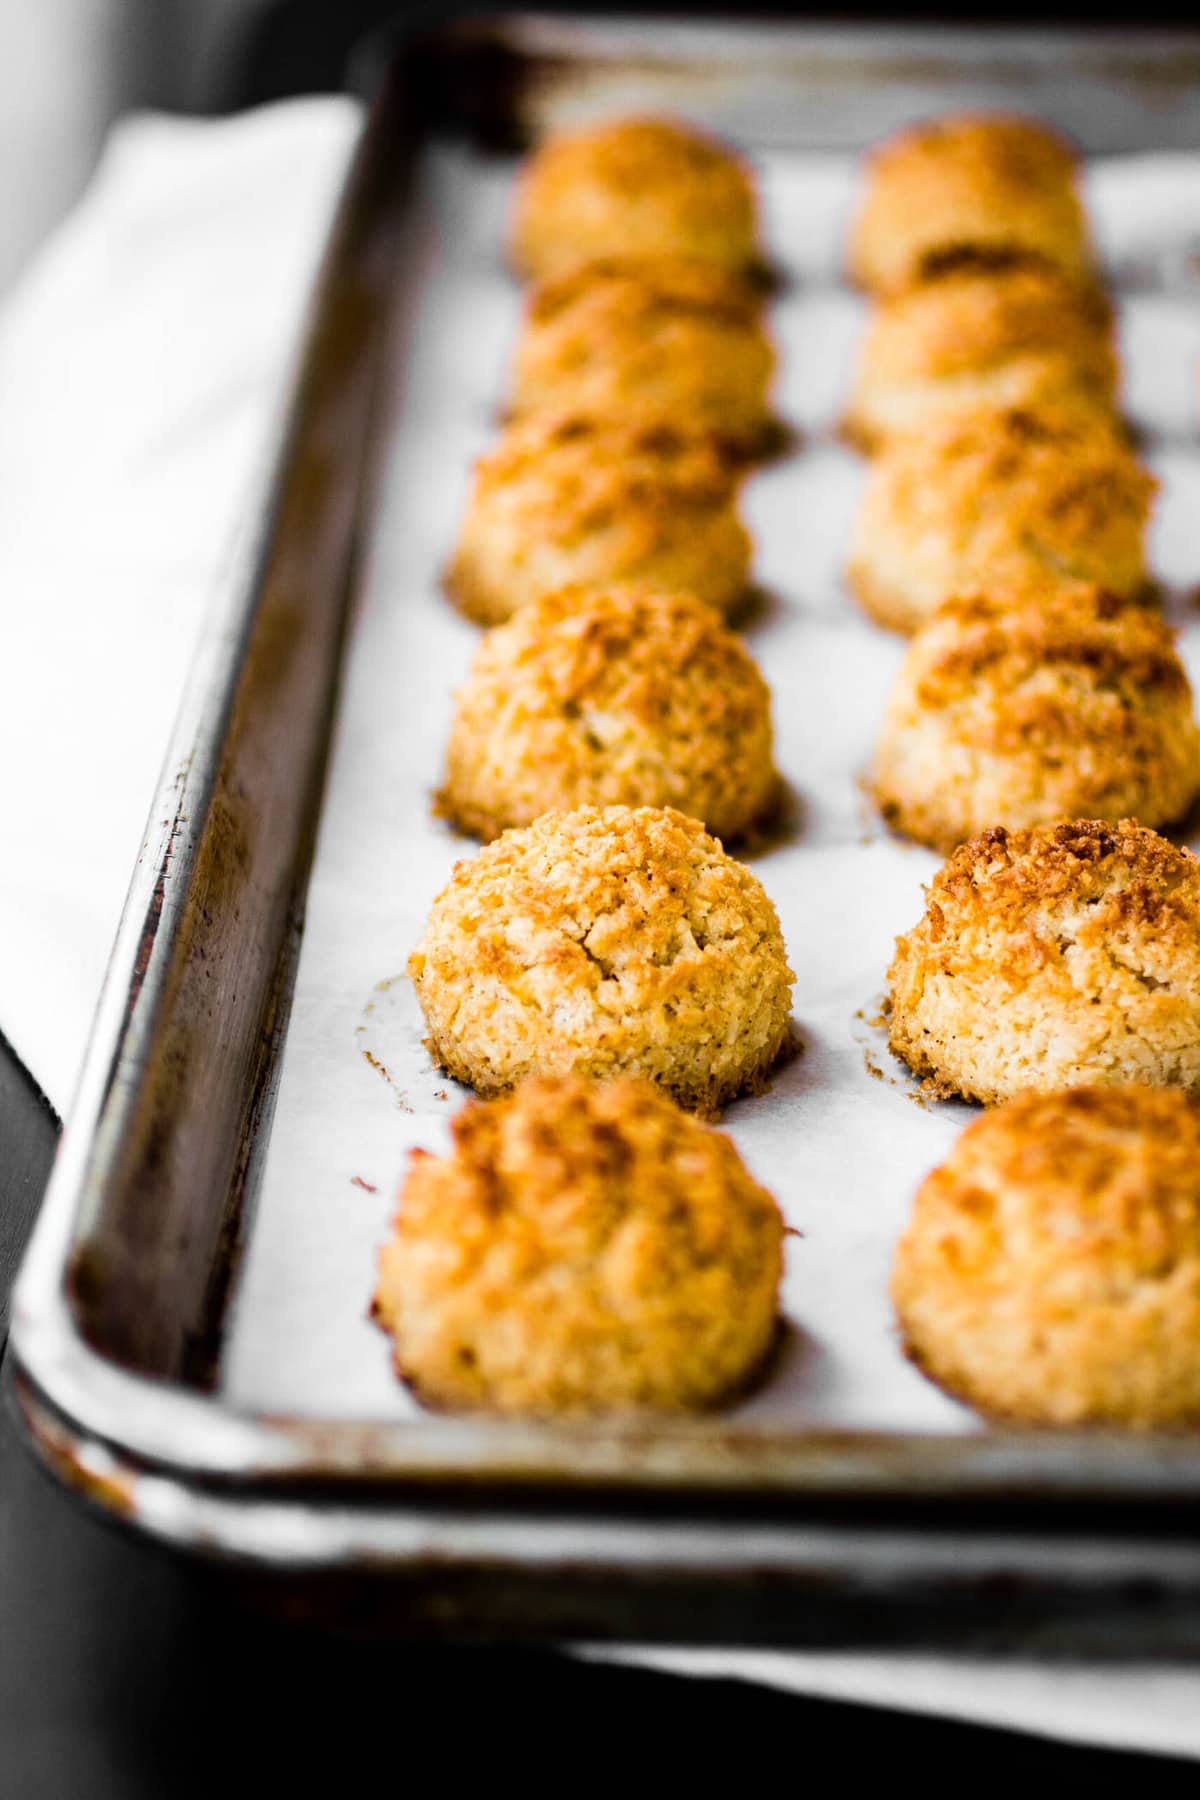 Baked macaroons have golden, craggy tops 